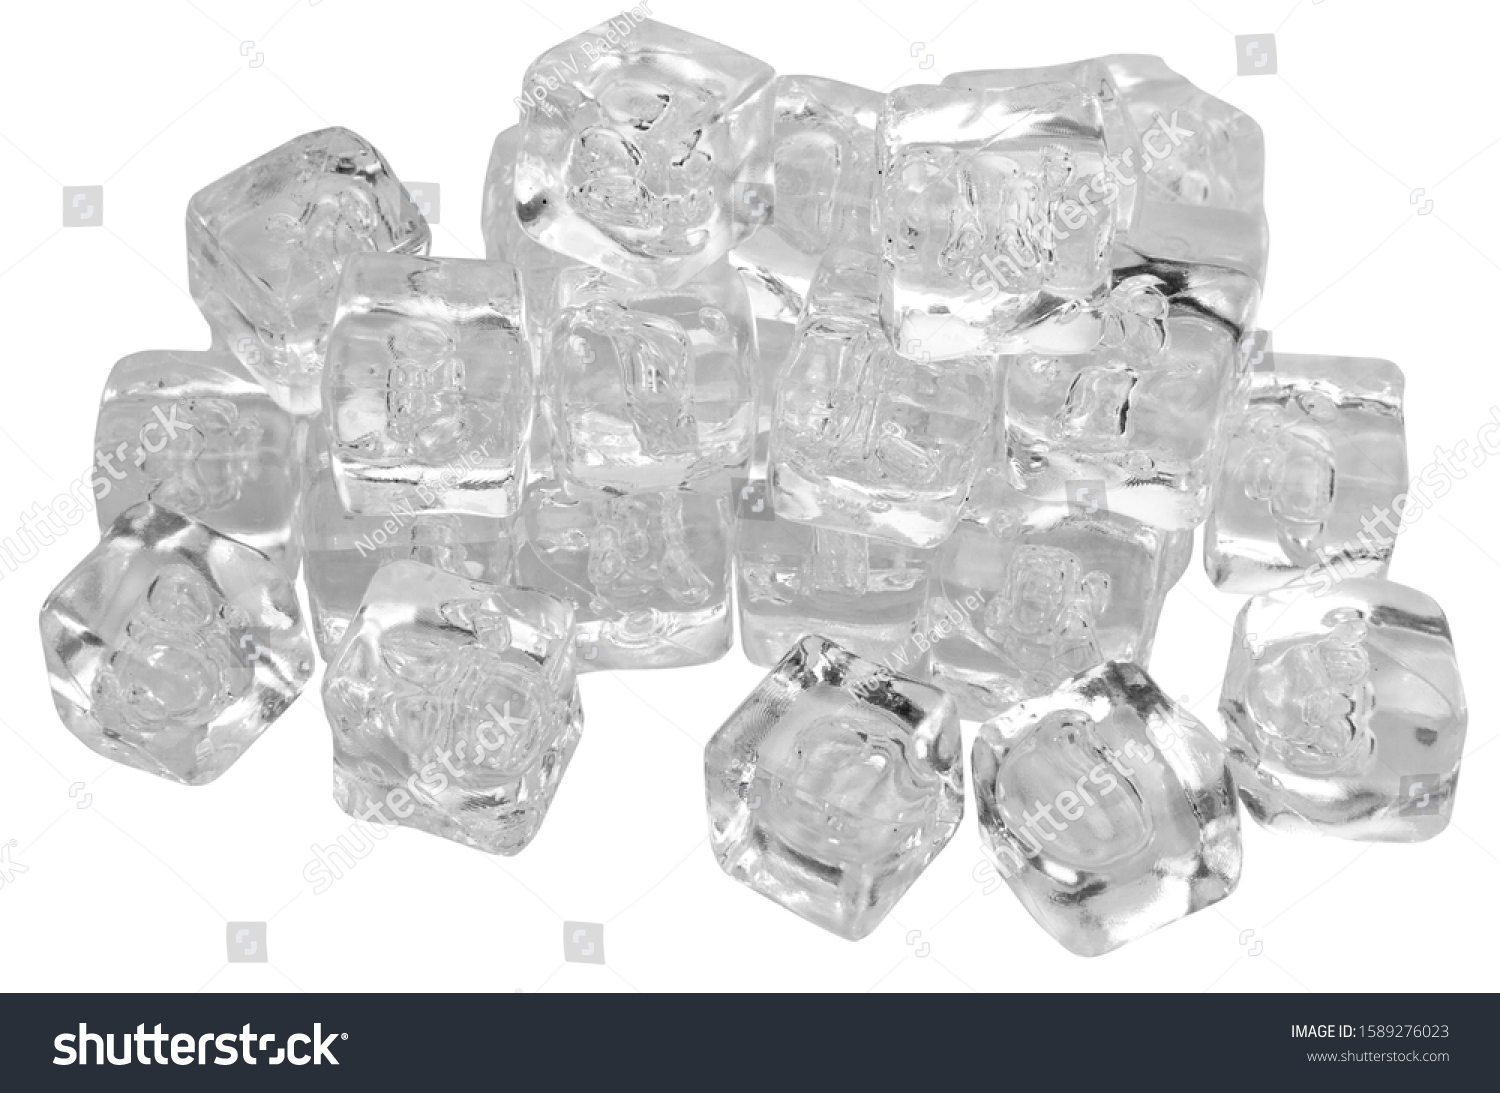 Many ice cubes isolated on a white background. #1589276023